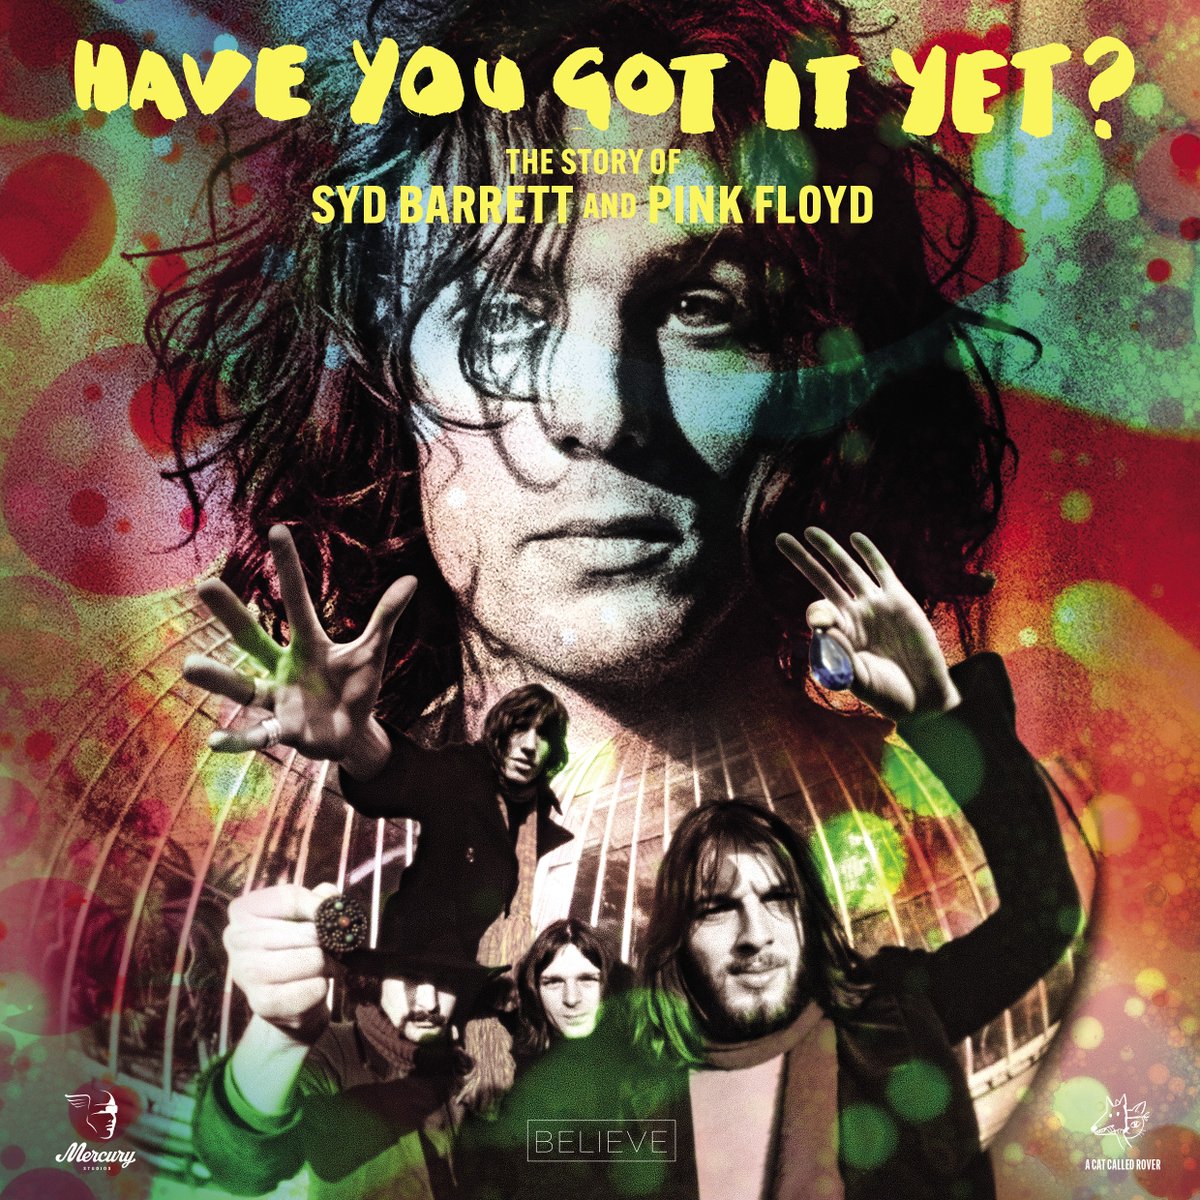 For UK fans, the documentary 'Have You Got It Yet - The Syd Barrett And Pink Floyd Story' has it's UK TV premiere tonight at 9pm on Sky Arts tvguide.co.uk/channel/sky-ar…